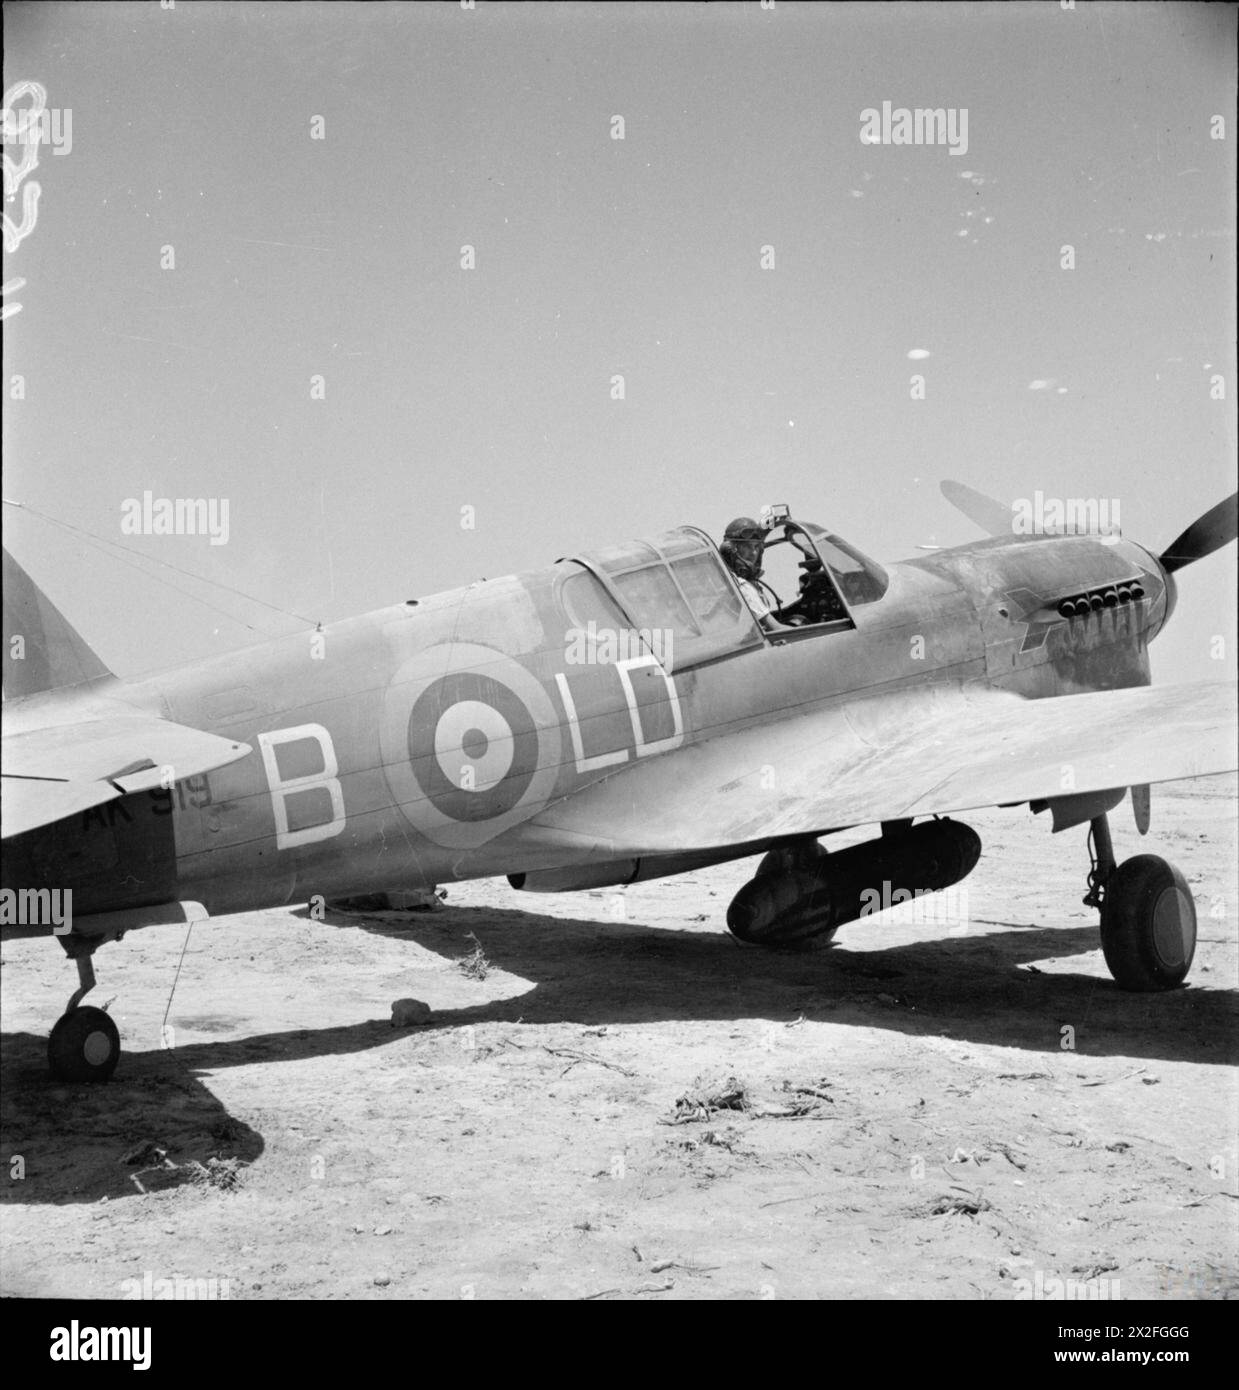 ROYAL AIR FORCE: OPERATIONS IN THE MIDDLE EAST AND NORTH AFRICA, 1940-1943. - Squadron Leader M T Judd, Officer Commanding No. 250 Squadron RAF, sitting in the cockpit of Curtiss Kittyhawk Mark I, AK919 'LD-B', at LG 91, Egypt. It was in this aircraft that Judd shot down a Junkers Ju 87 over LG 21 on 8 July 1942, and damaged another on 19 July. Note the red arrow unit marking over the exhaust stubs on the engine cowling Royal Air Force, Wing, 250 Stock Photo